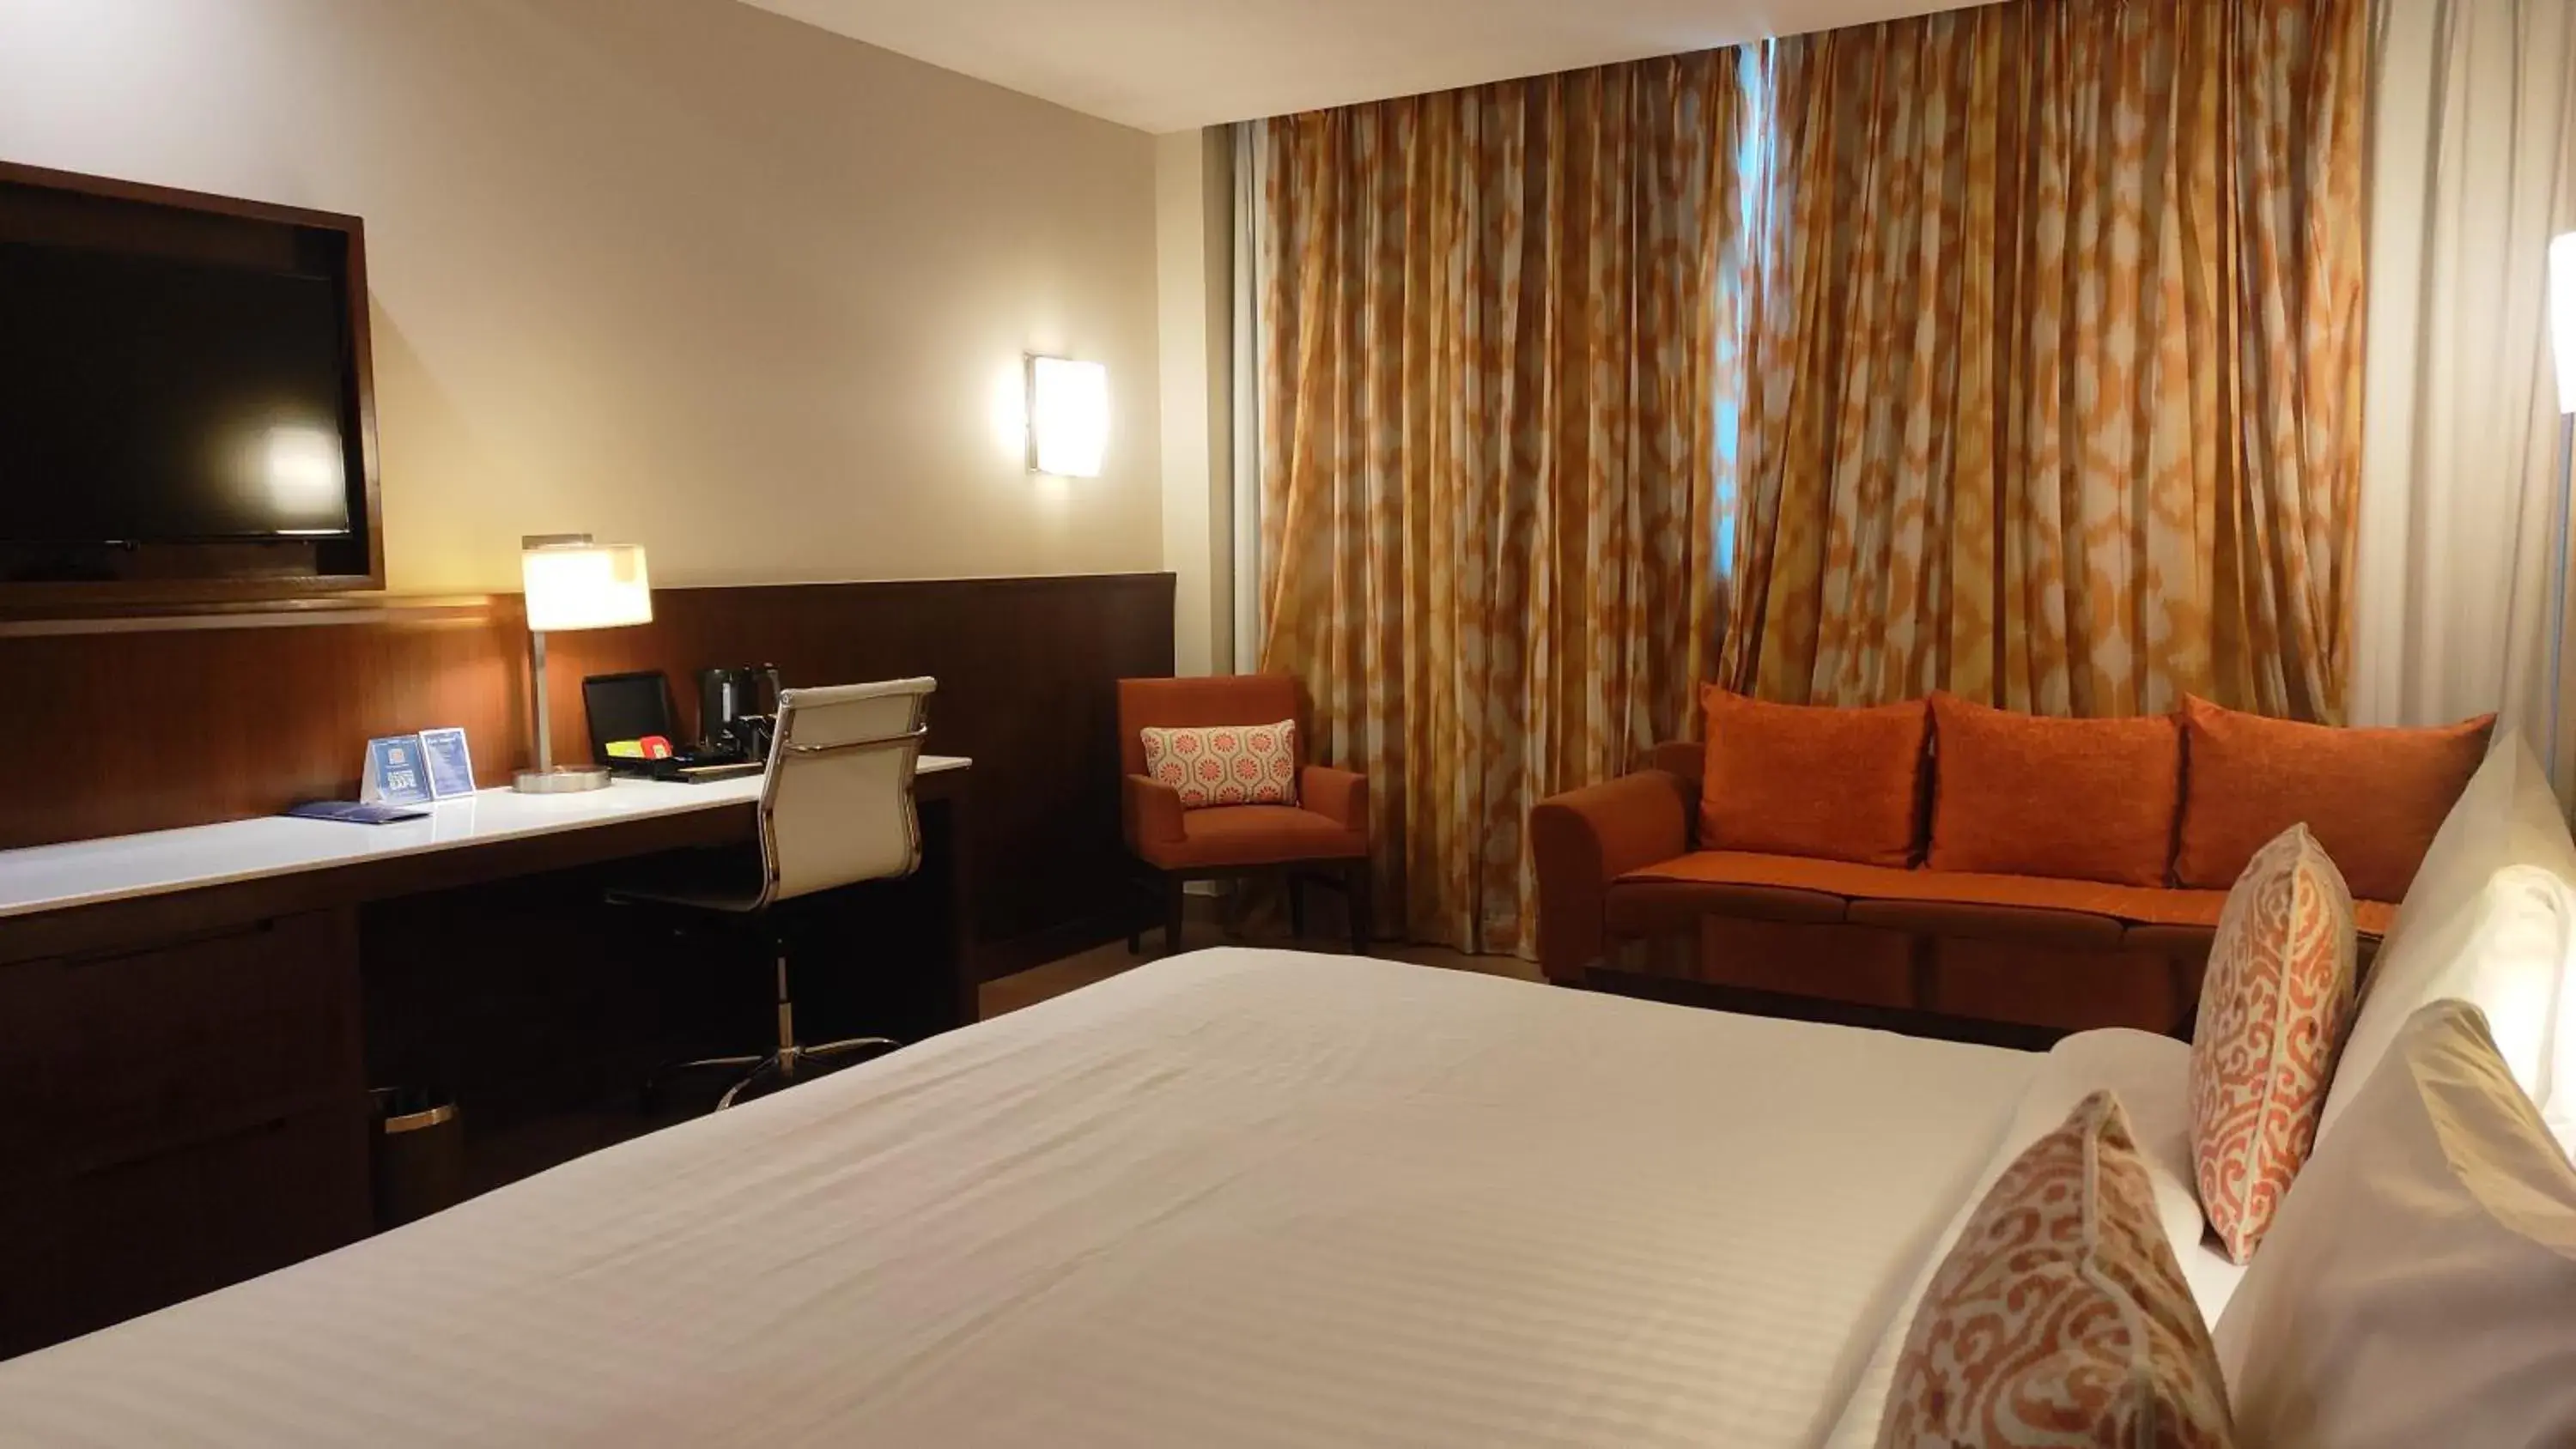 Superior King Room with 15% discount on Food and Soft beverages,02hr of Early check-in or late check-out ( subject to availability ) in Fairfield by Marriott Amritsar